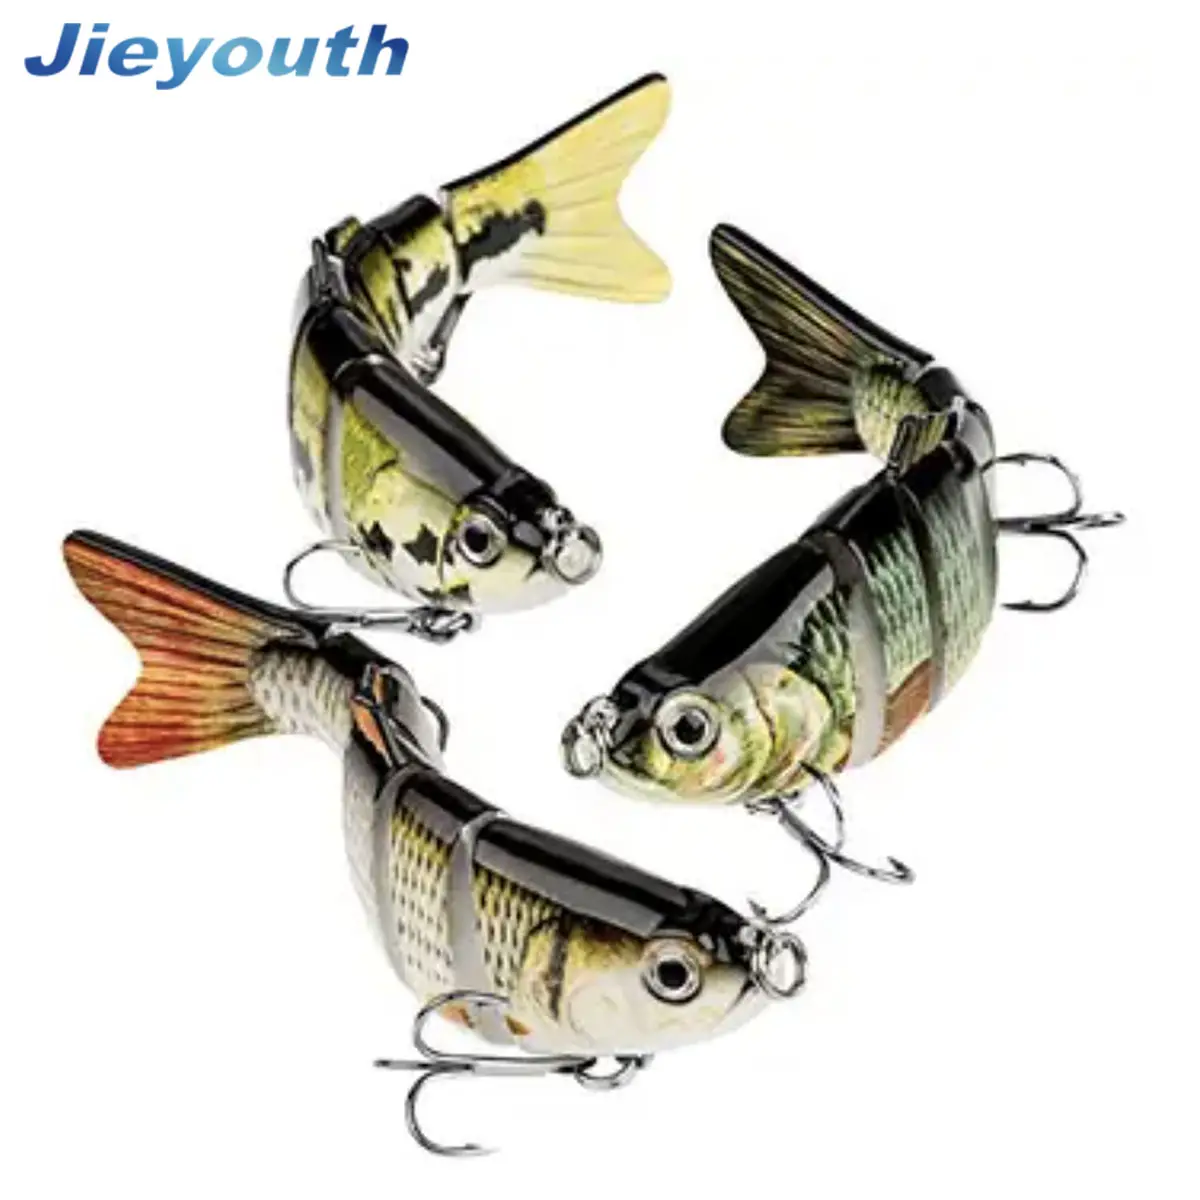 Factory Fishing Lures for Bass Trout Multi Jointed Slow Sinking Bionic Swimming Lures Lifelike Fishing Lures Kit Hard Bait